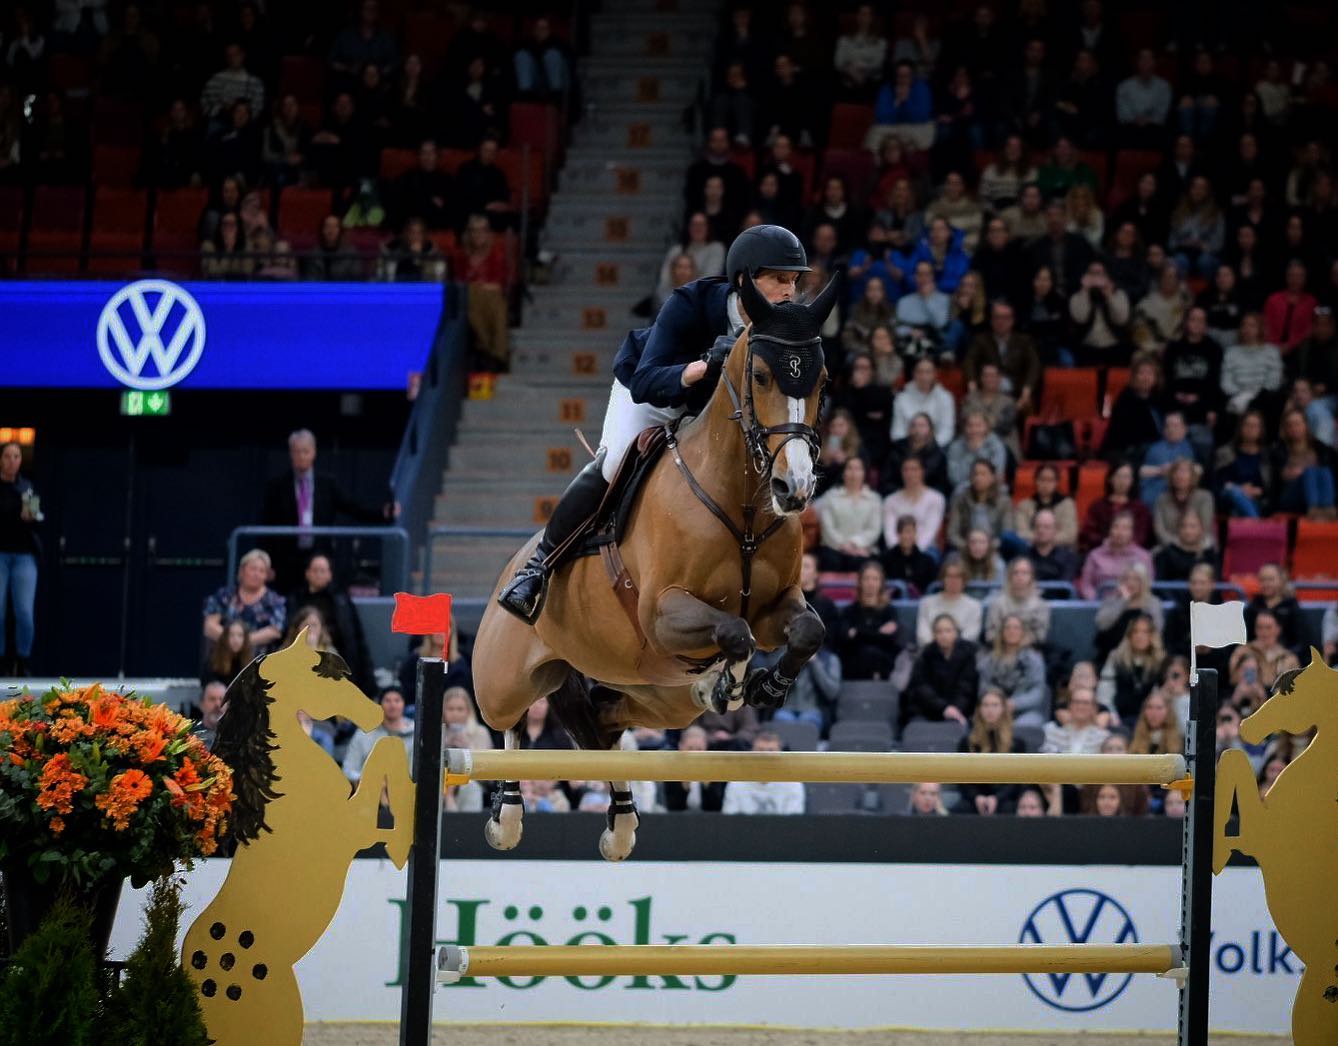 Horses and riders for Göteborg Horse Show!